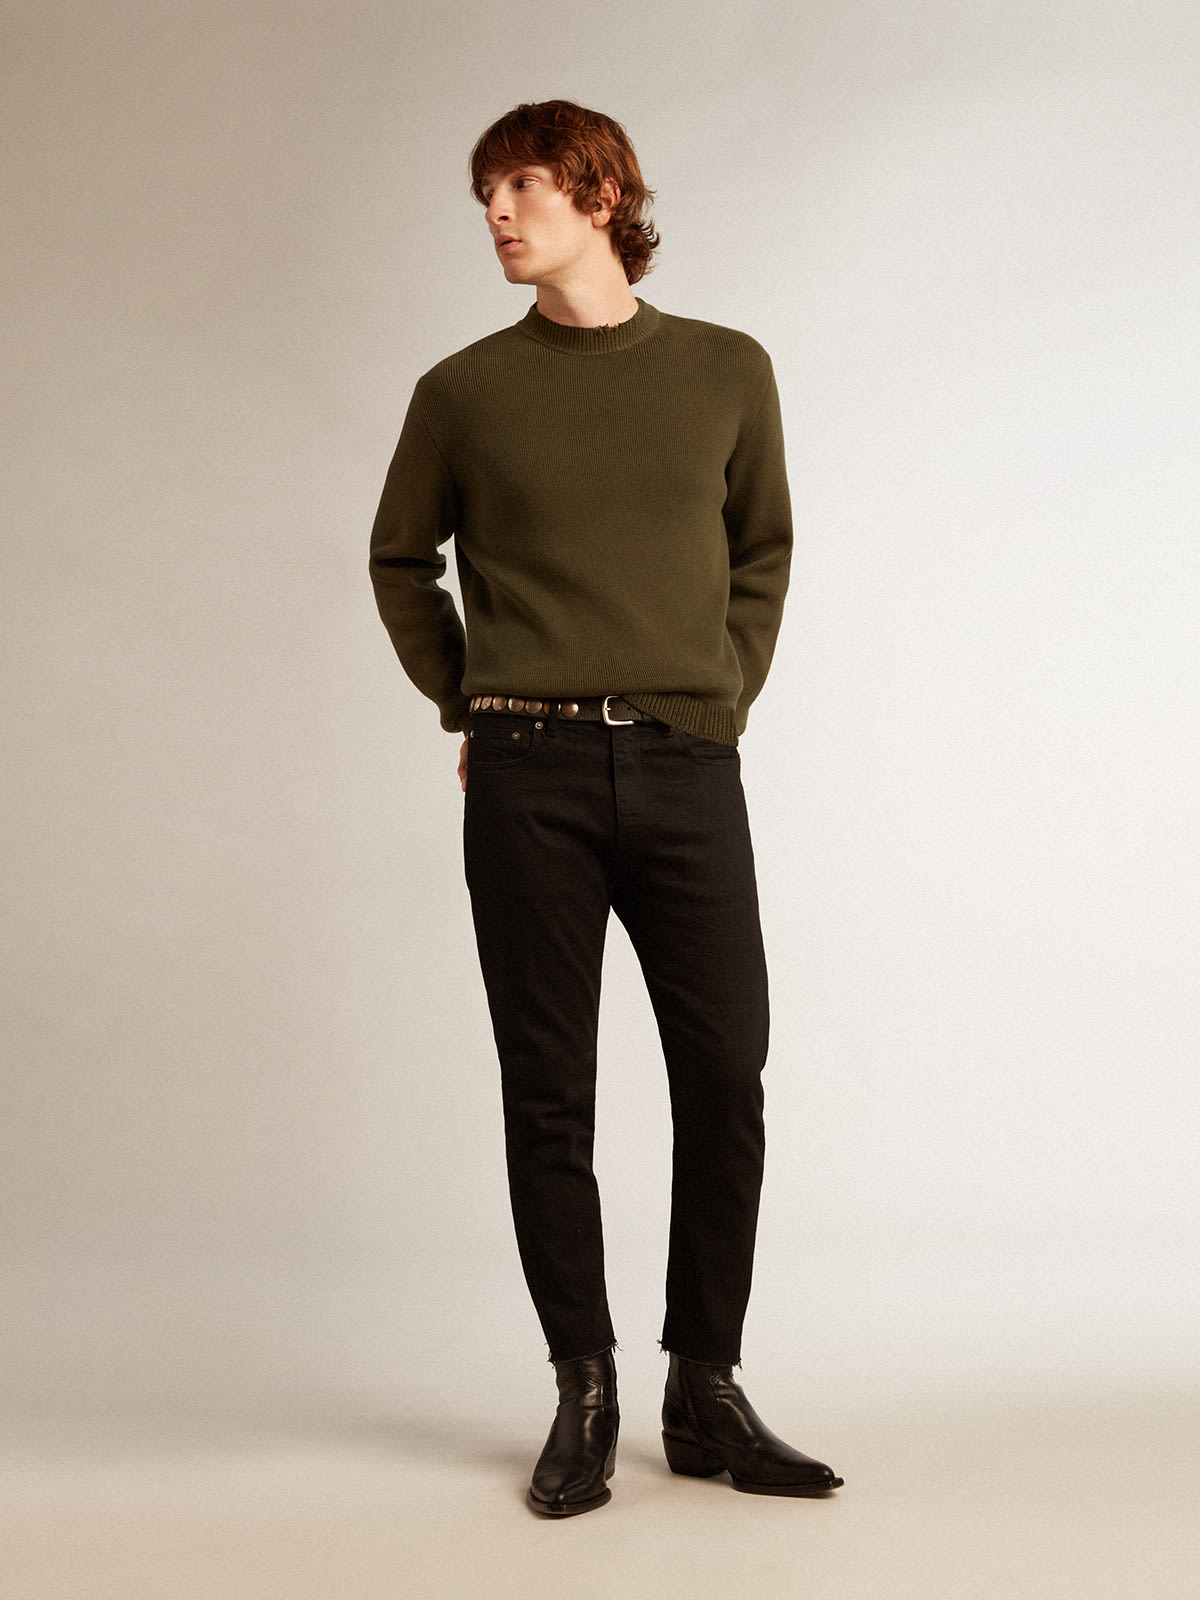 Golden Goose - Men's round-neck sweater in military green cotton in 